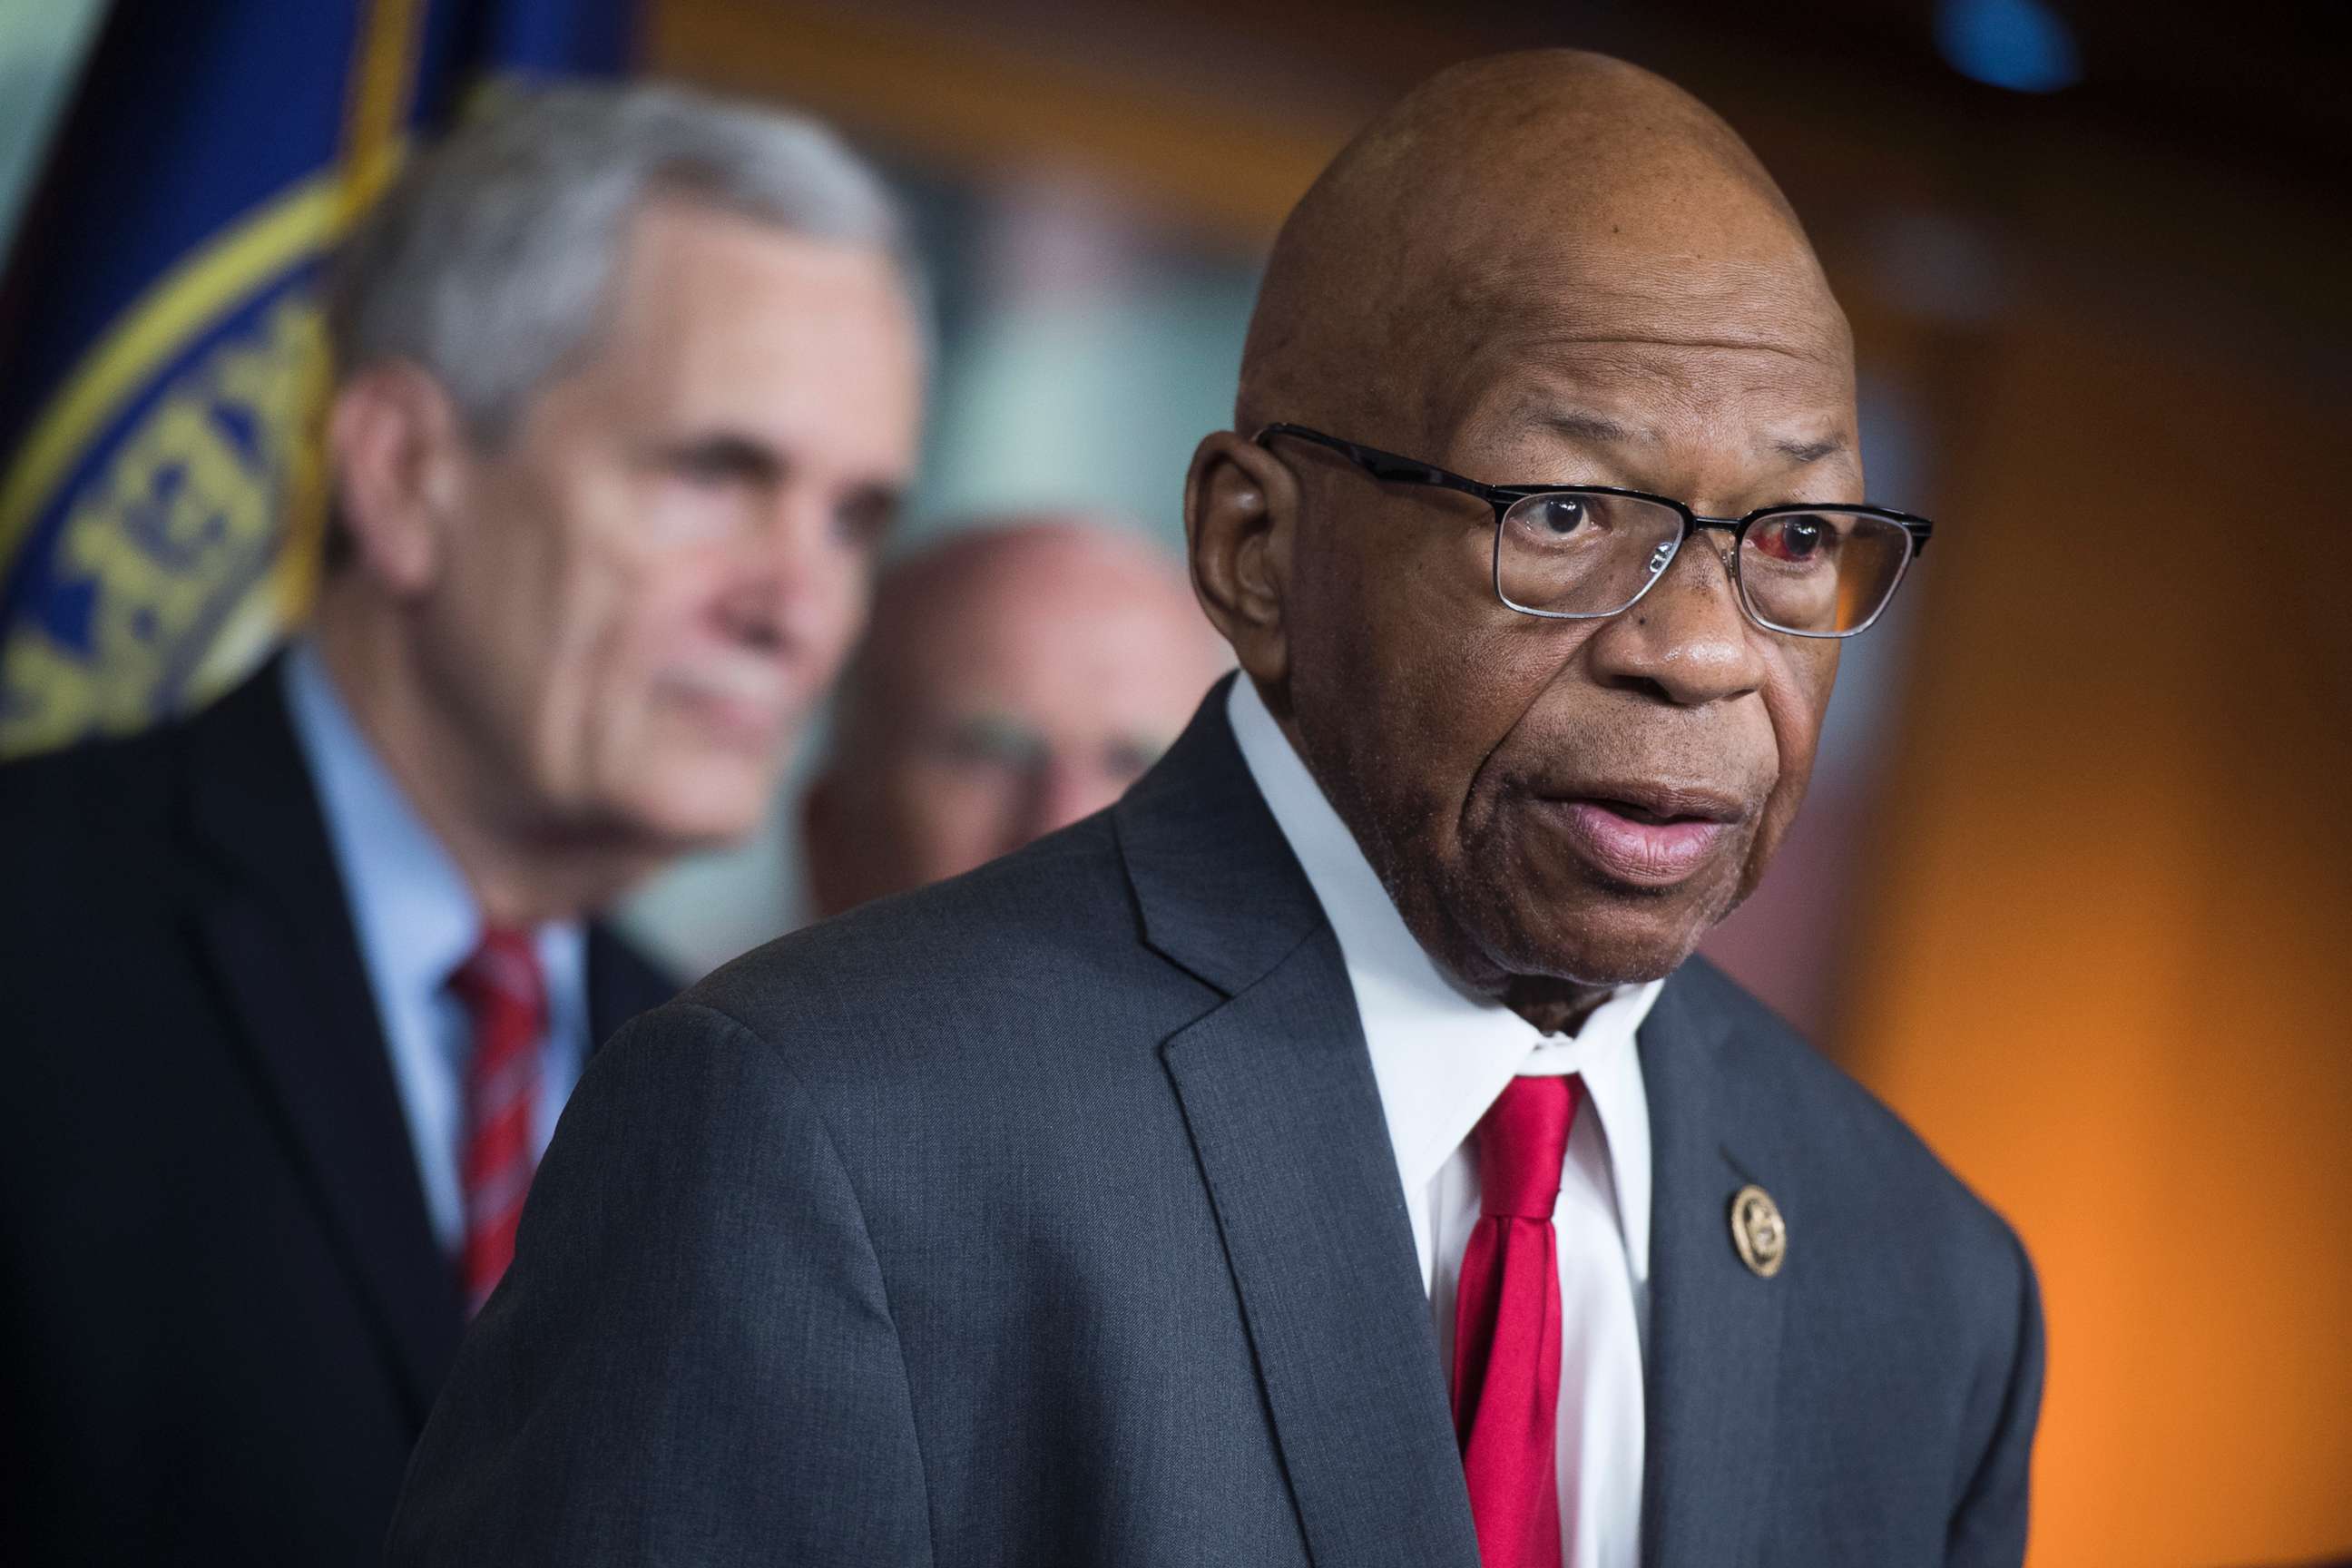 PHOTO: Rep. Elijah Cummings speaks during a news conference in the Capitol Visitor Center with House and Senate Democrats in Washington on May 10, 2018.